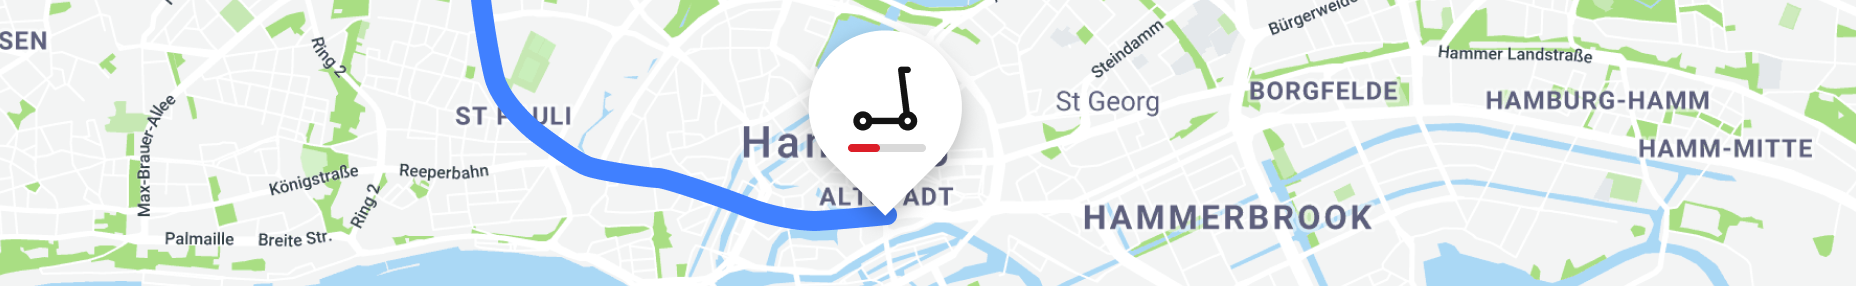 Map overview of Hamburg with a point of interest displaying a kickscooter icon which is low in battery charge.